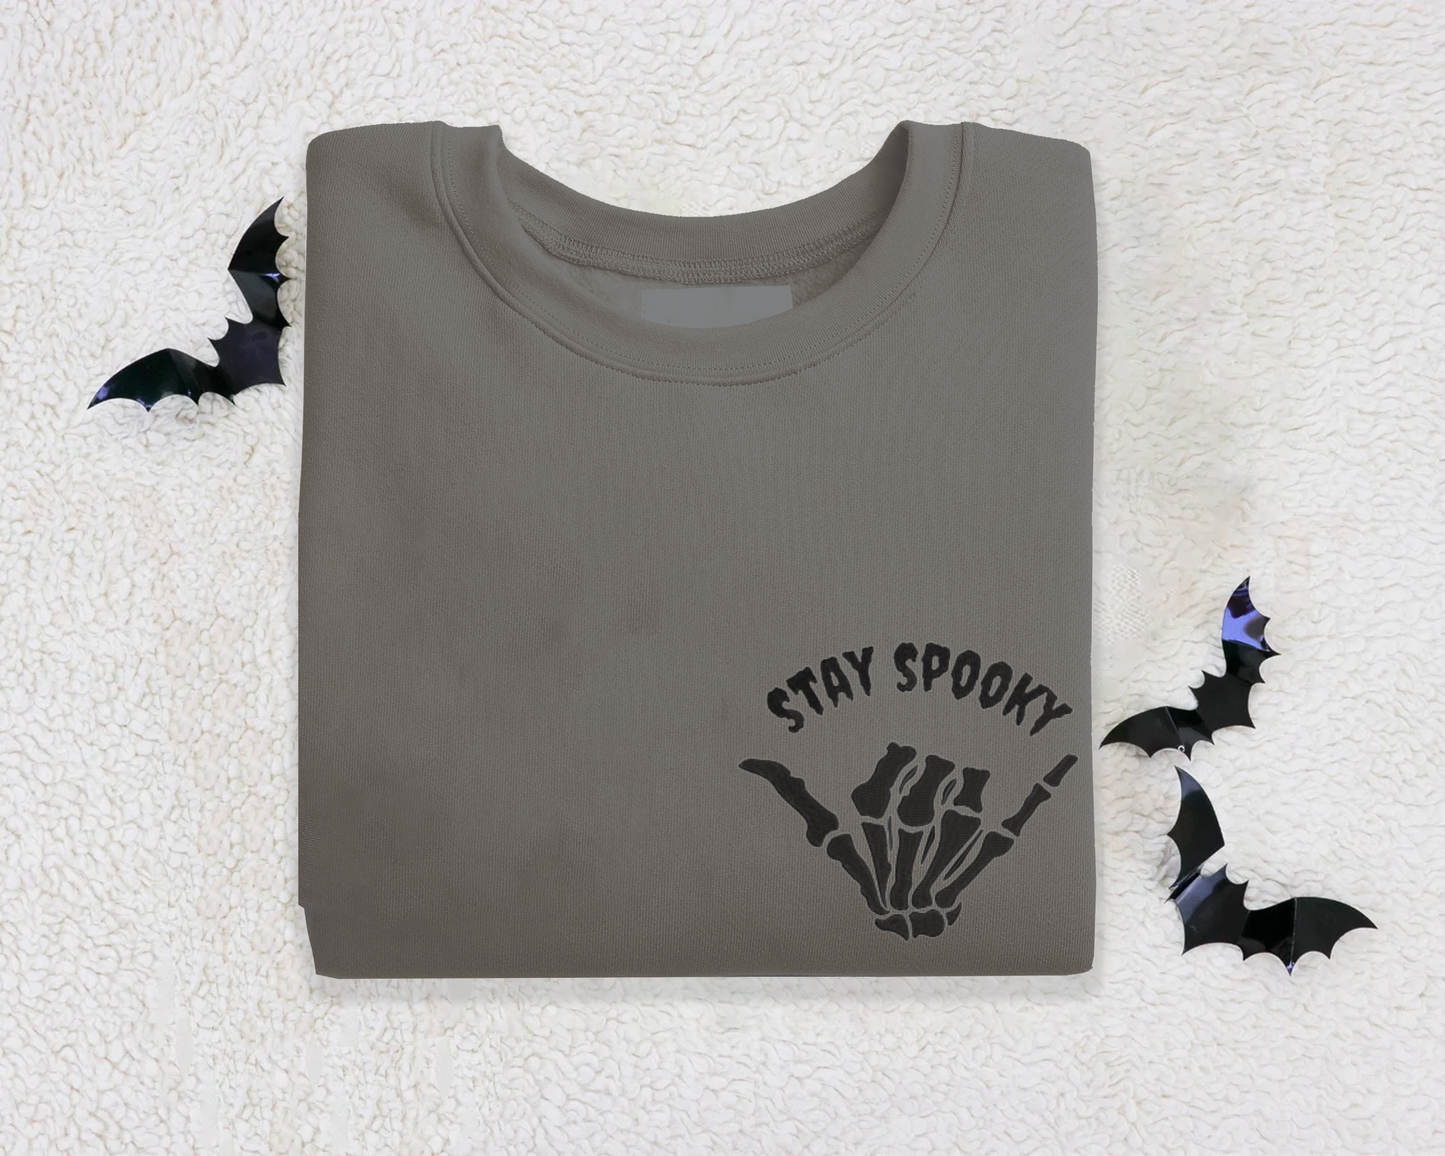 Stay Spooky Skeleton Hand Embroidered Crewneck